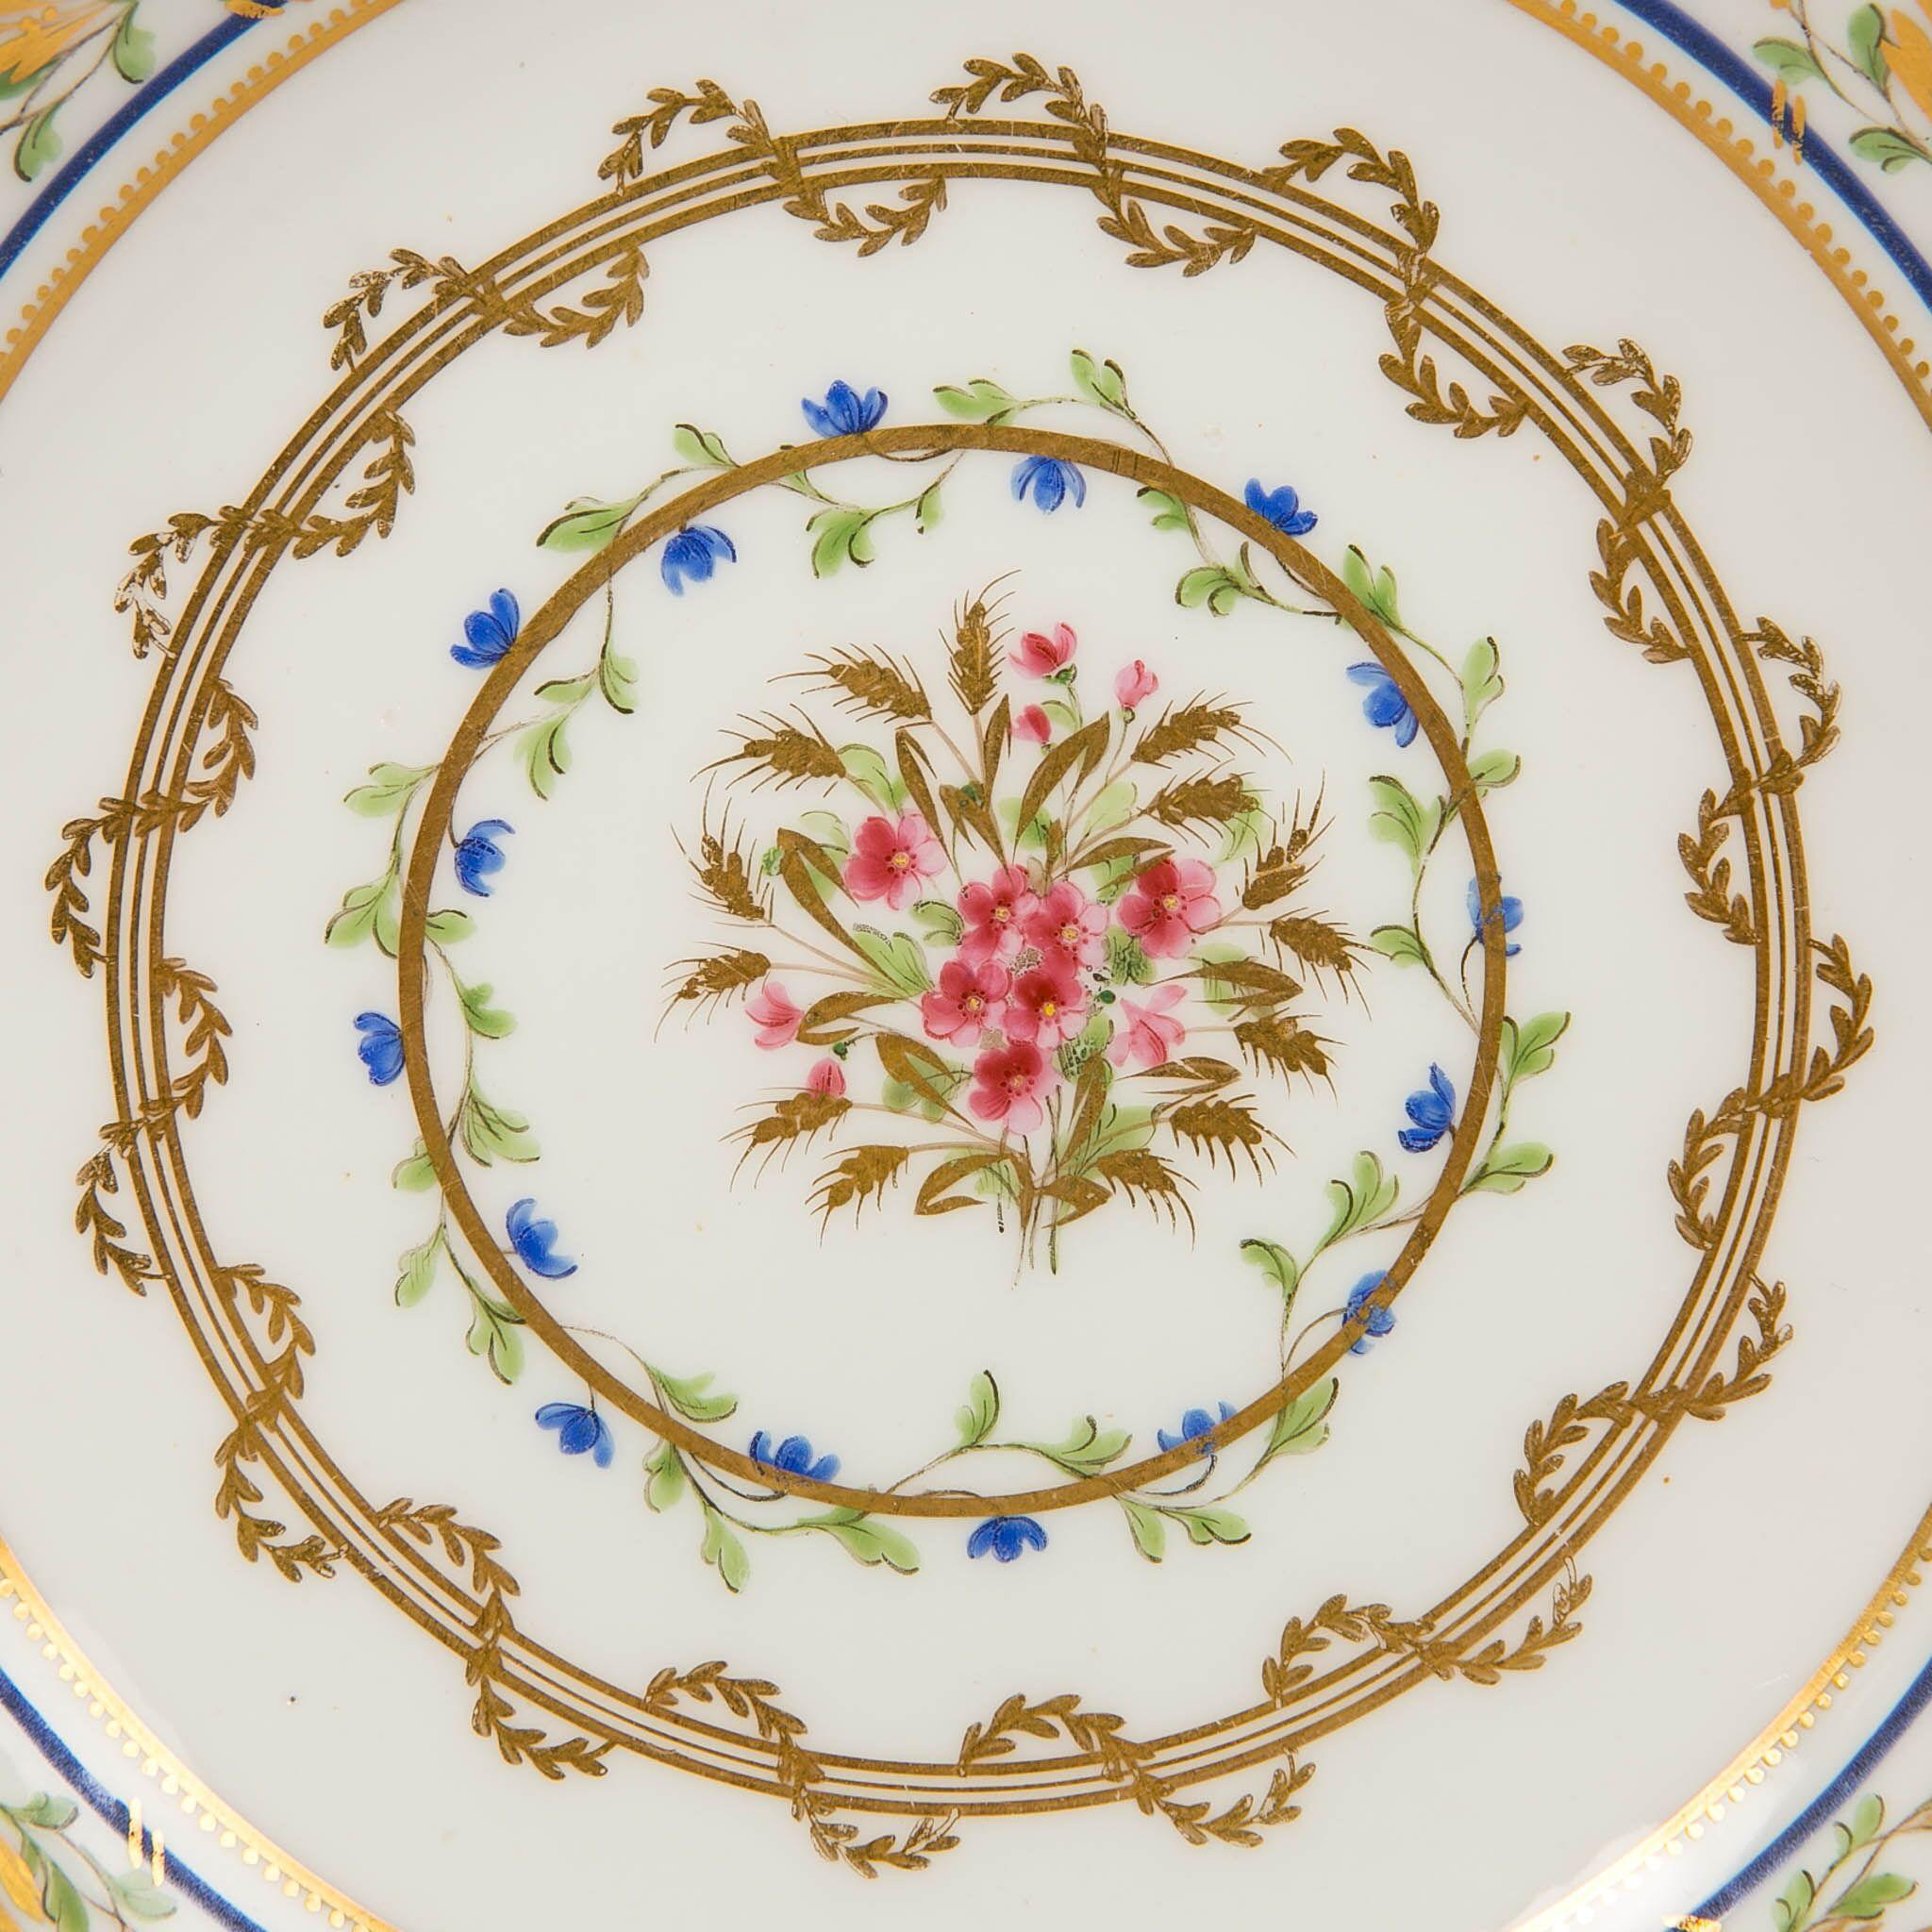 We are pleased to offer this beautiful, hand-painted Sèvres porcelain dish which typifies the exquisite French style of the eighteenth century. The colors and design create a sense of movement, intensity and life. The center is decorated with a